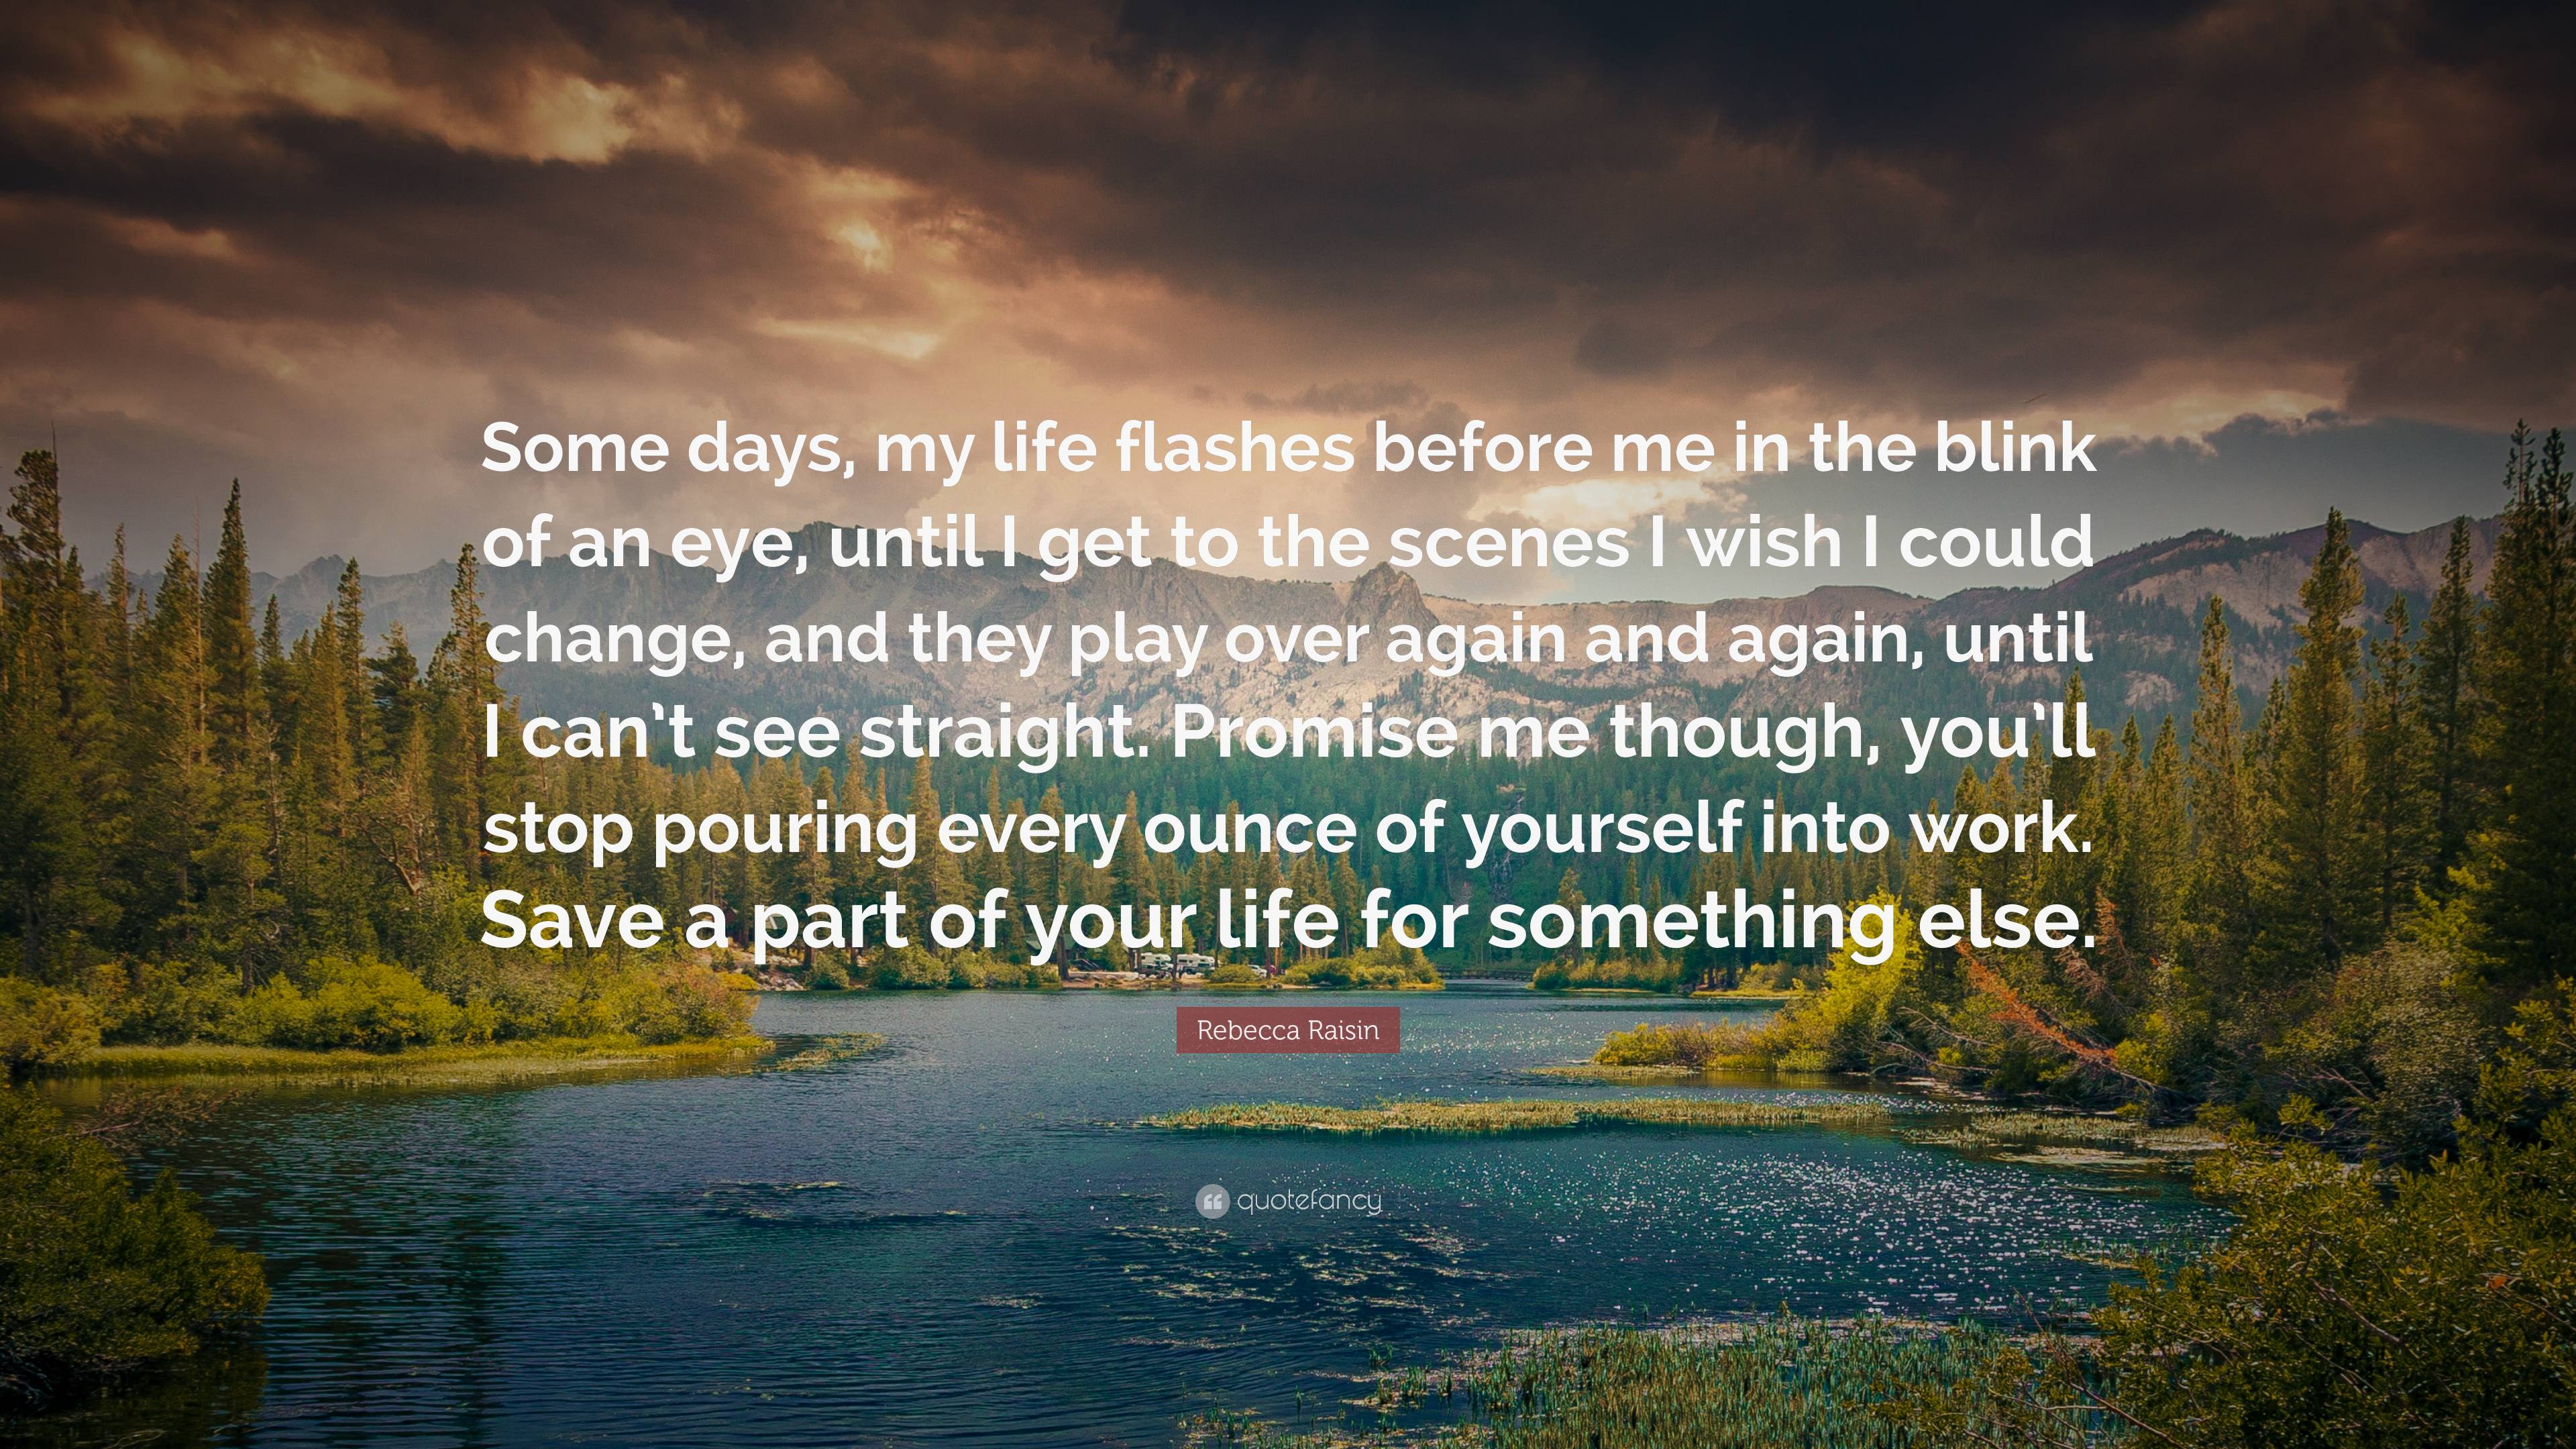 Rebecca Raisin Quote: “Some days, my life flashes before me in the ...